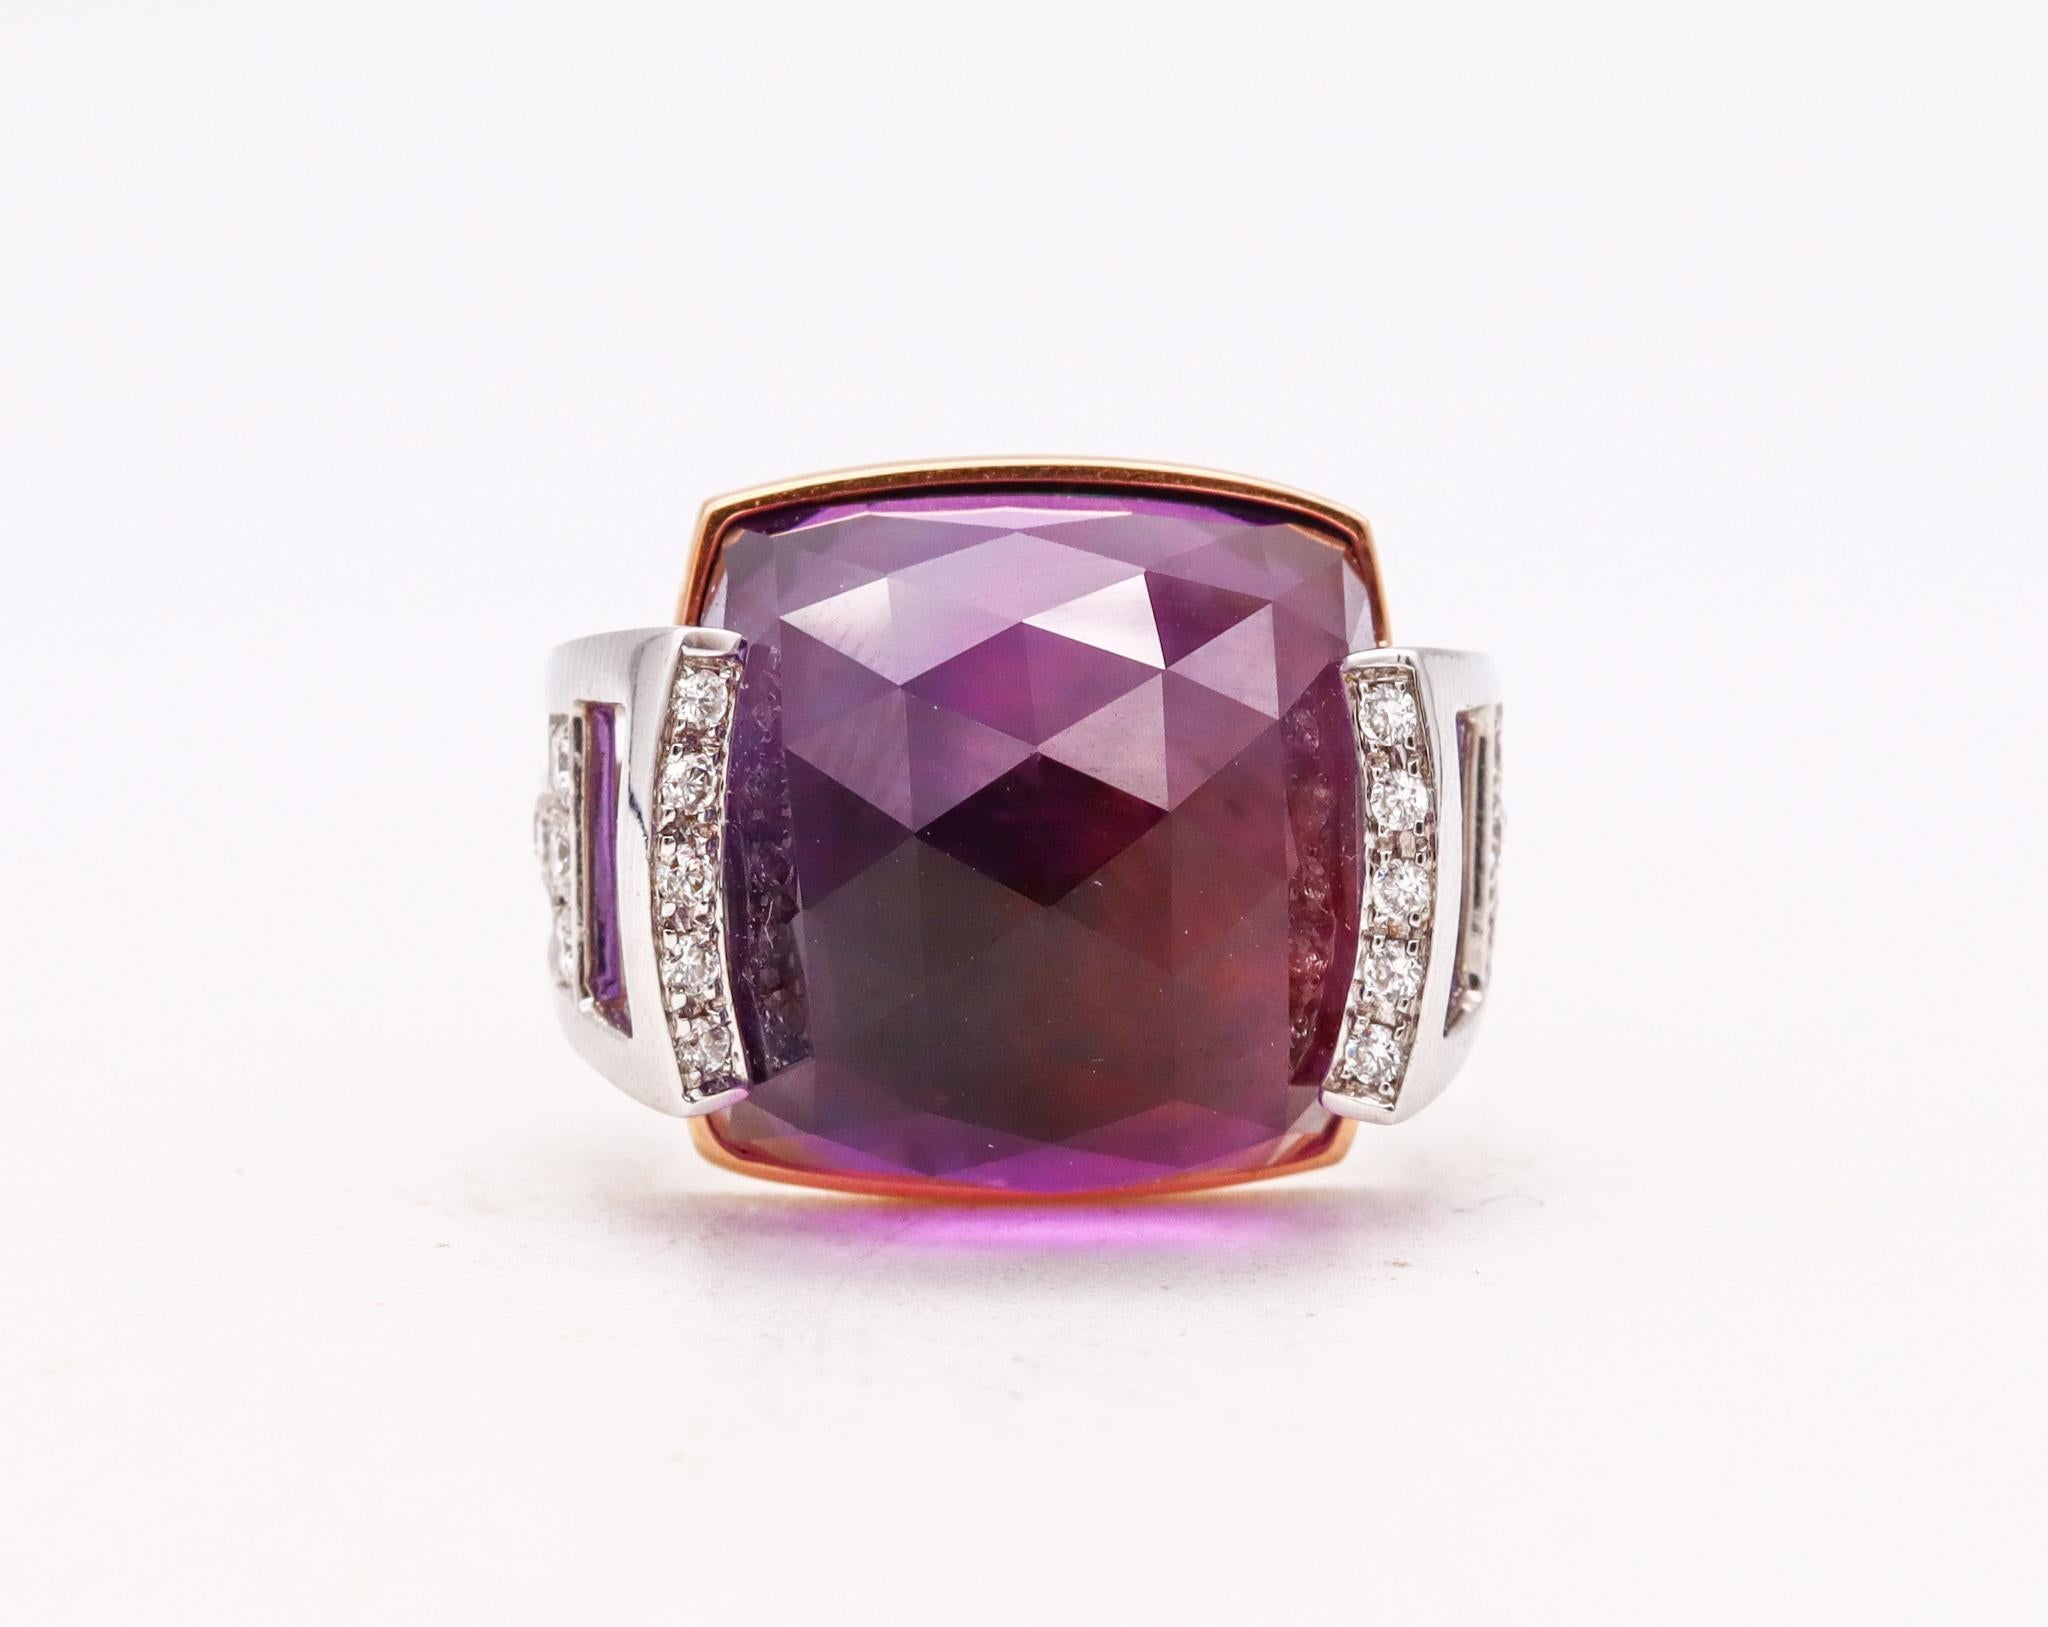 Salavetti Italy Geometric Cocktail Ring 18Kt Gold 23.51 Cts Diamonds Amethyst For Sale 1